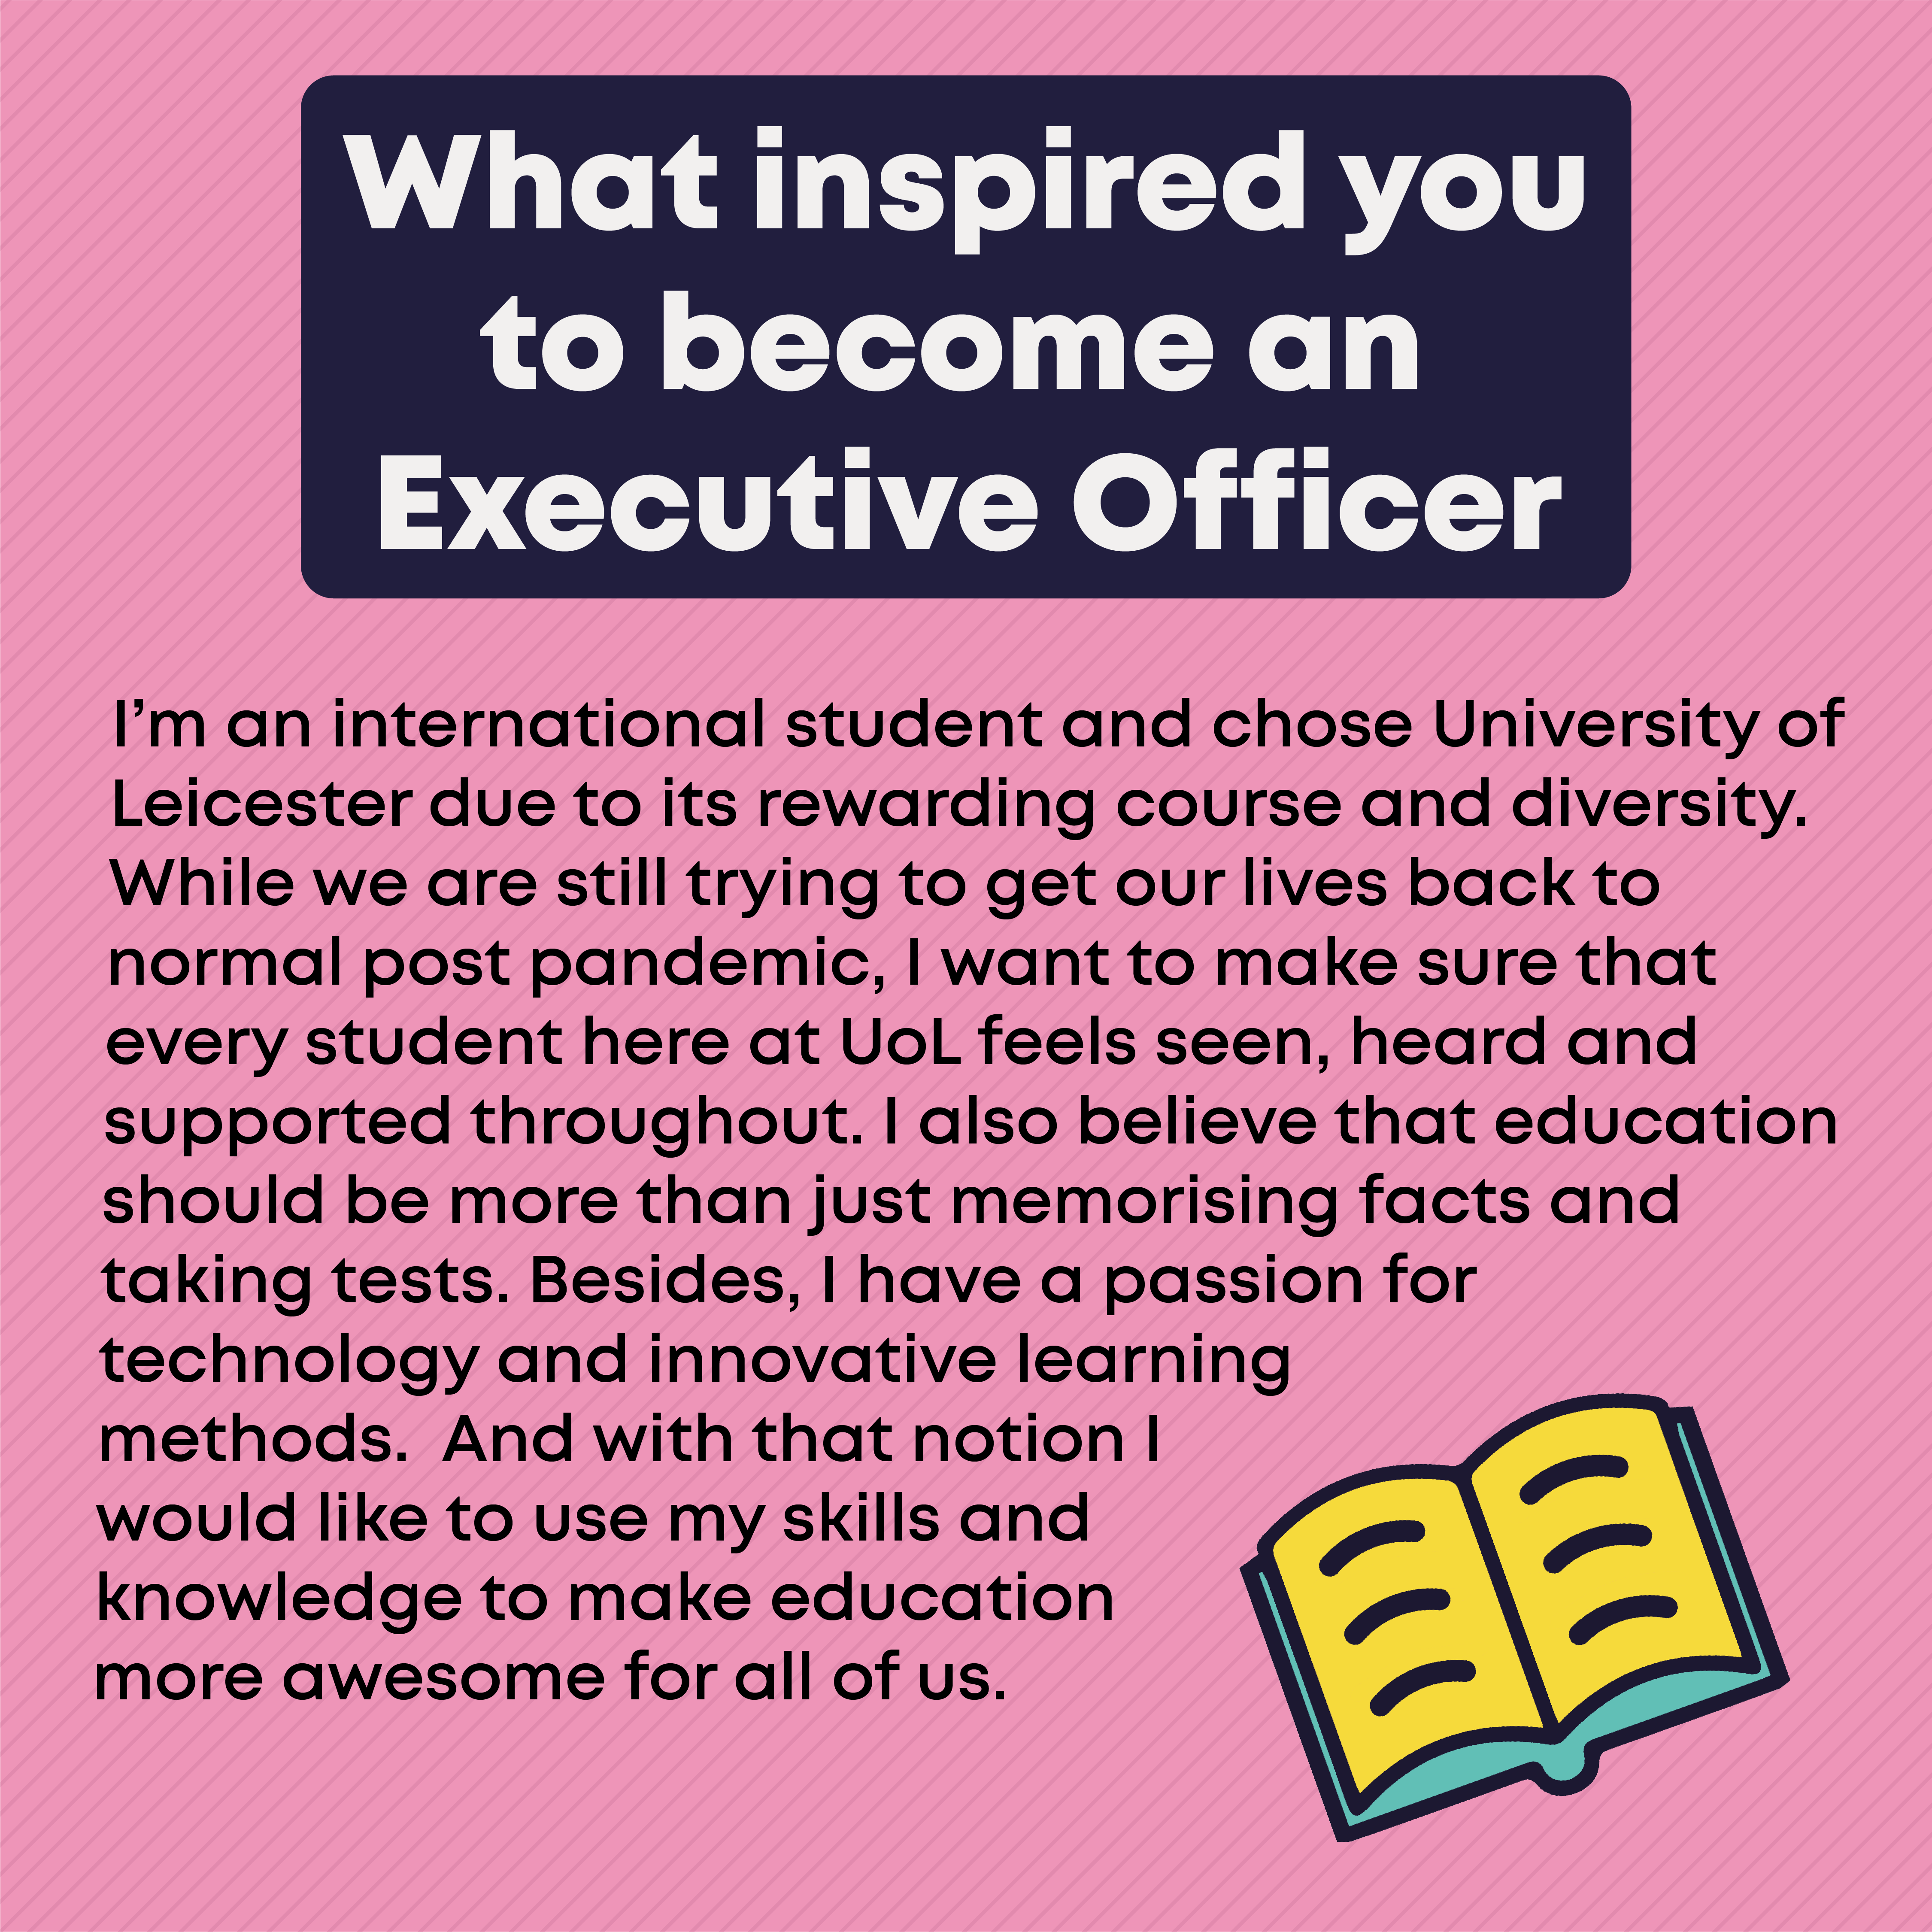 What inspired you to become an Executive Officer?  I’m an international student and chose University of Leicester due to its rewarding course and diversity. While we are still trying to get our lives back to normal post pandemic, I want to make sure that every student here at UoL feels seen, heard and supported throughout. I also believe that education should be more than just memorising facts and taking tests. Besides, I have a passion for technology and innovative learning methods.  And with that notion I would like to use my skills and knowledge to make education more awesome for all of us.